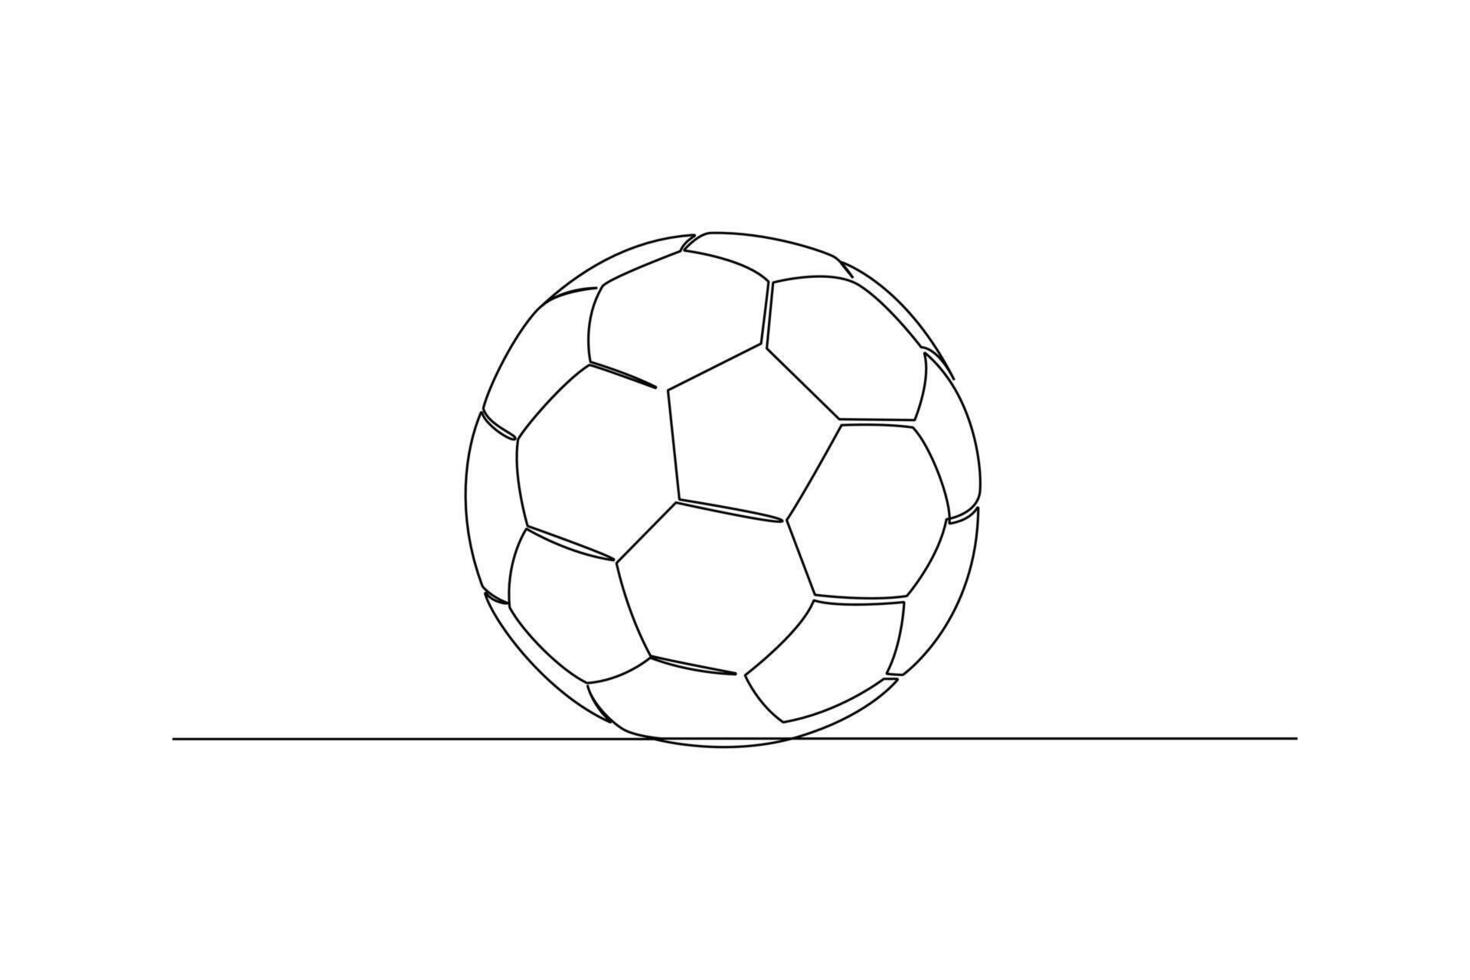 One continuous line drawing of Sports concept. Doodle vector illustration in simple linear style.